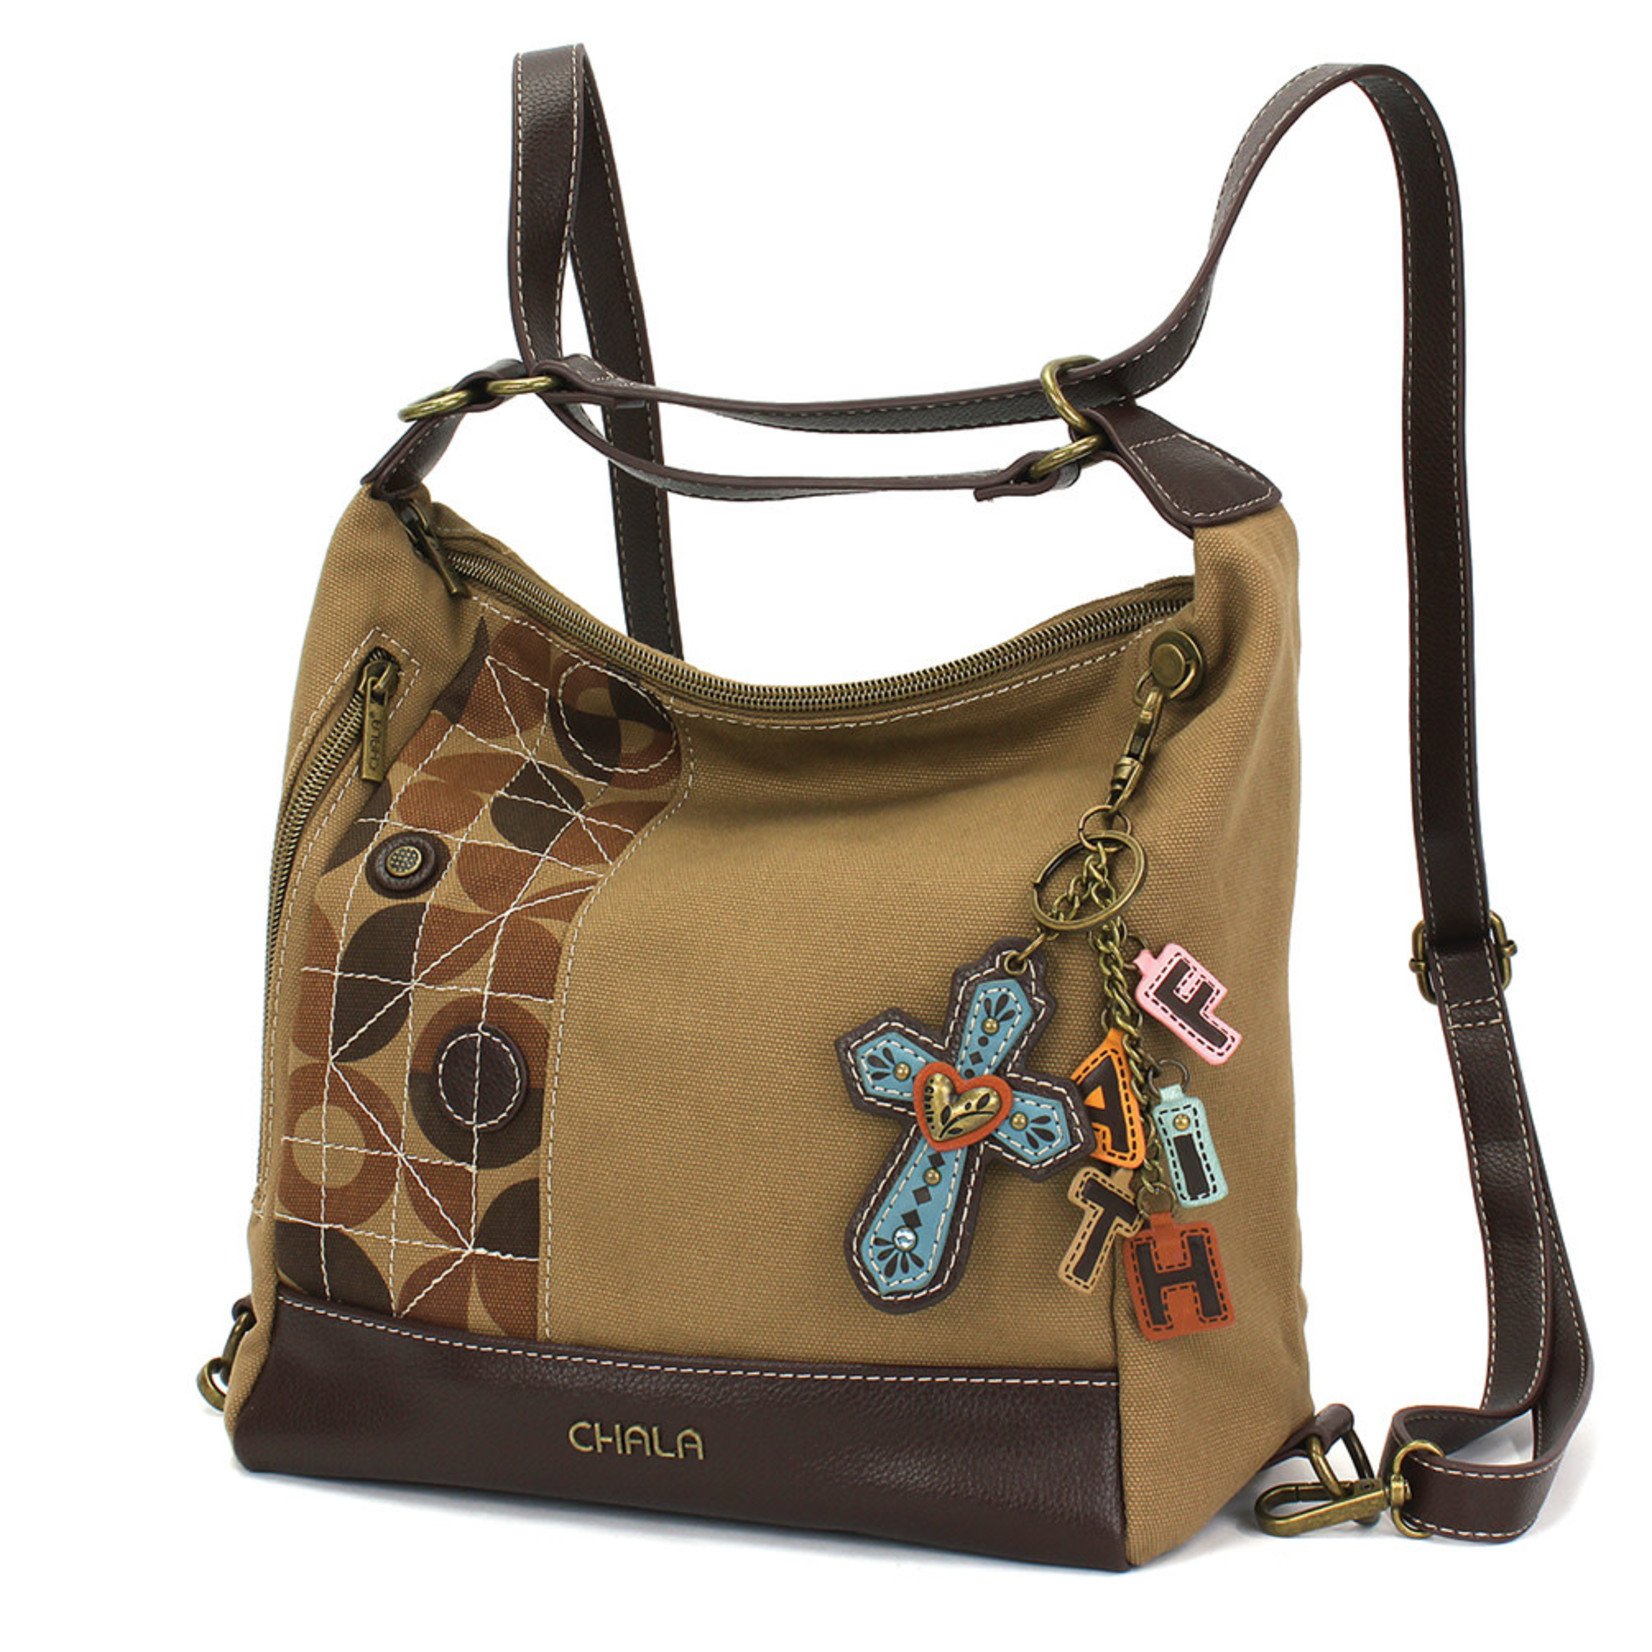 Chala Retro Convertible Purse - (Olive) CROSS - Charming Charms Keychain